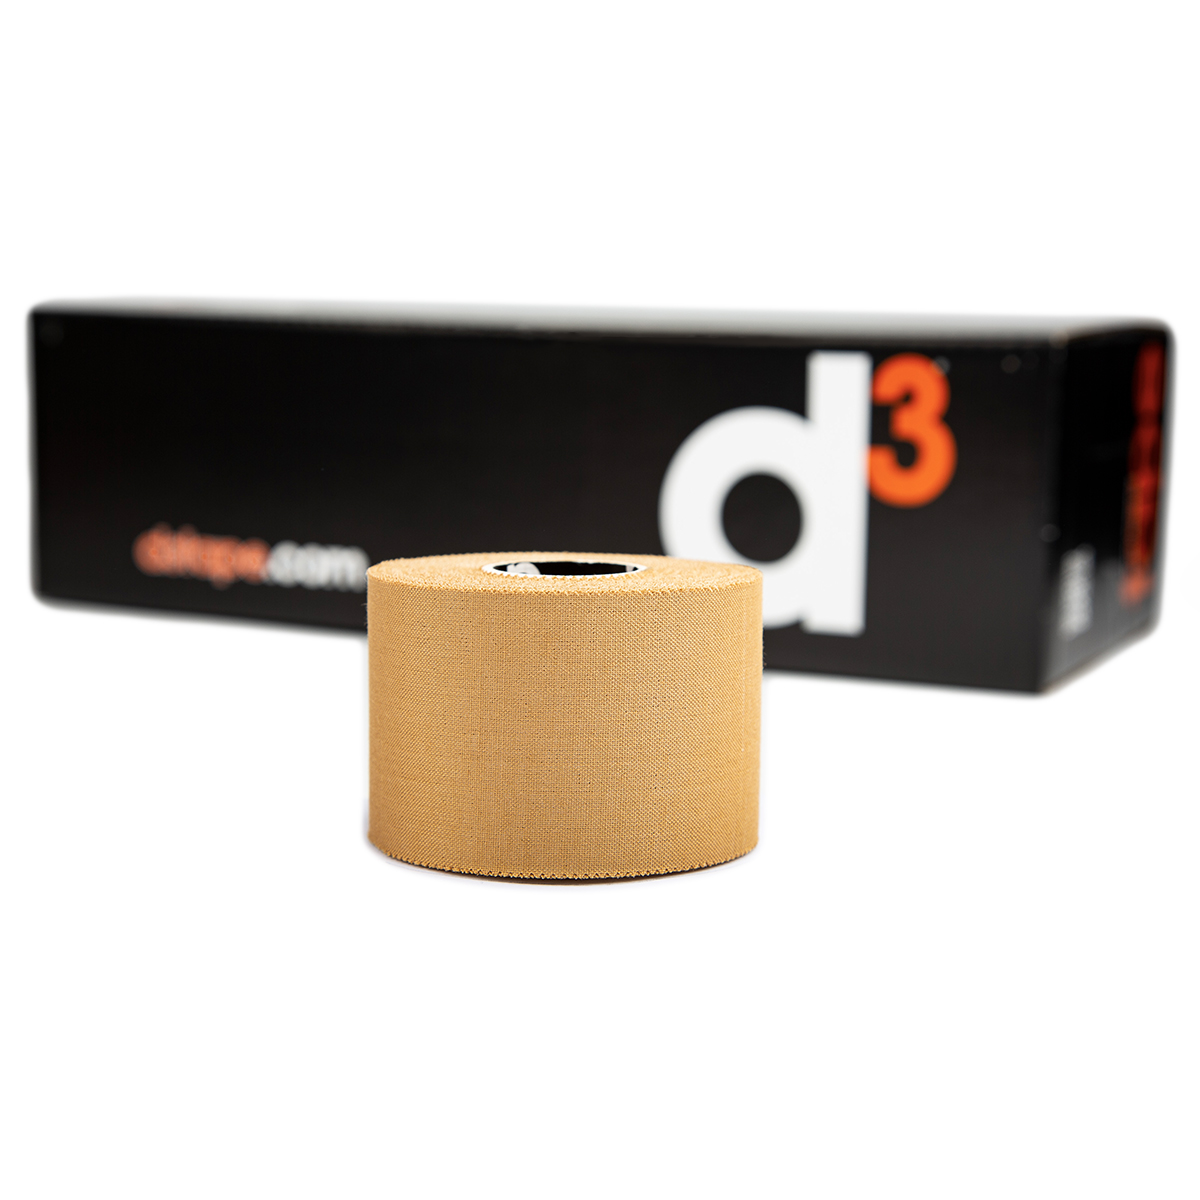 product image for Rigid Strapping Tape